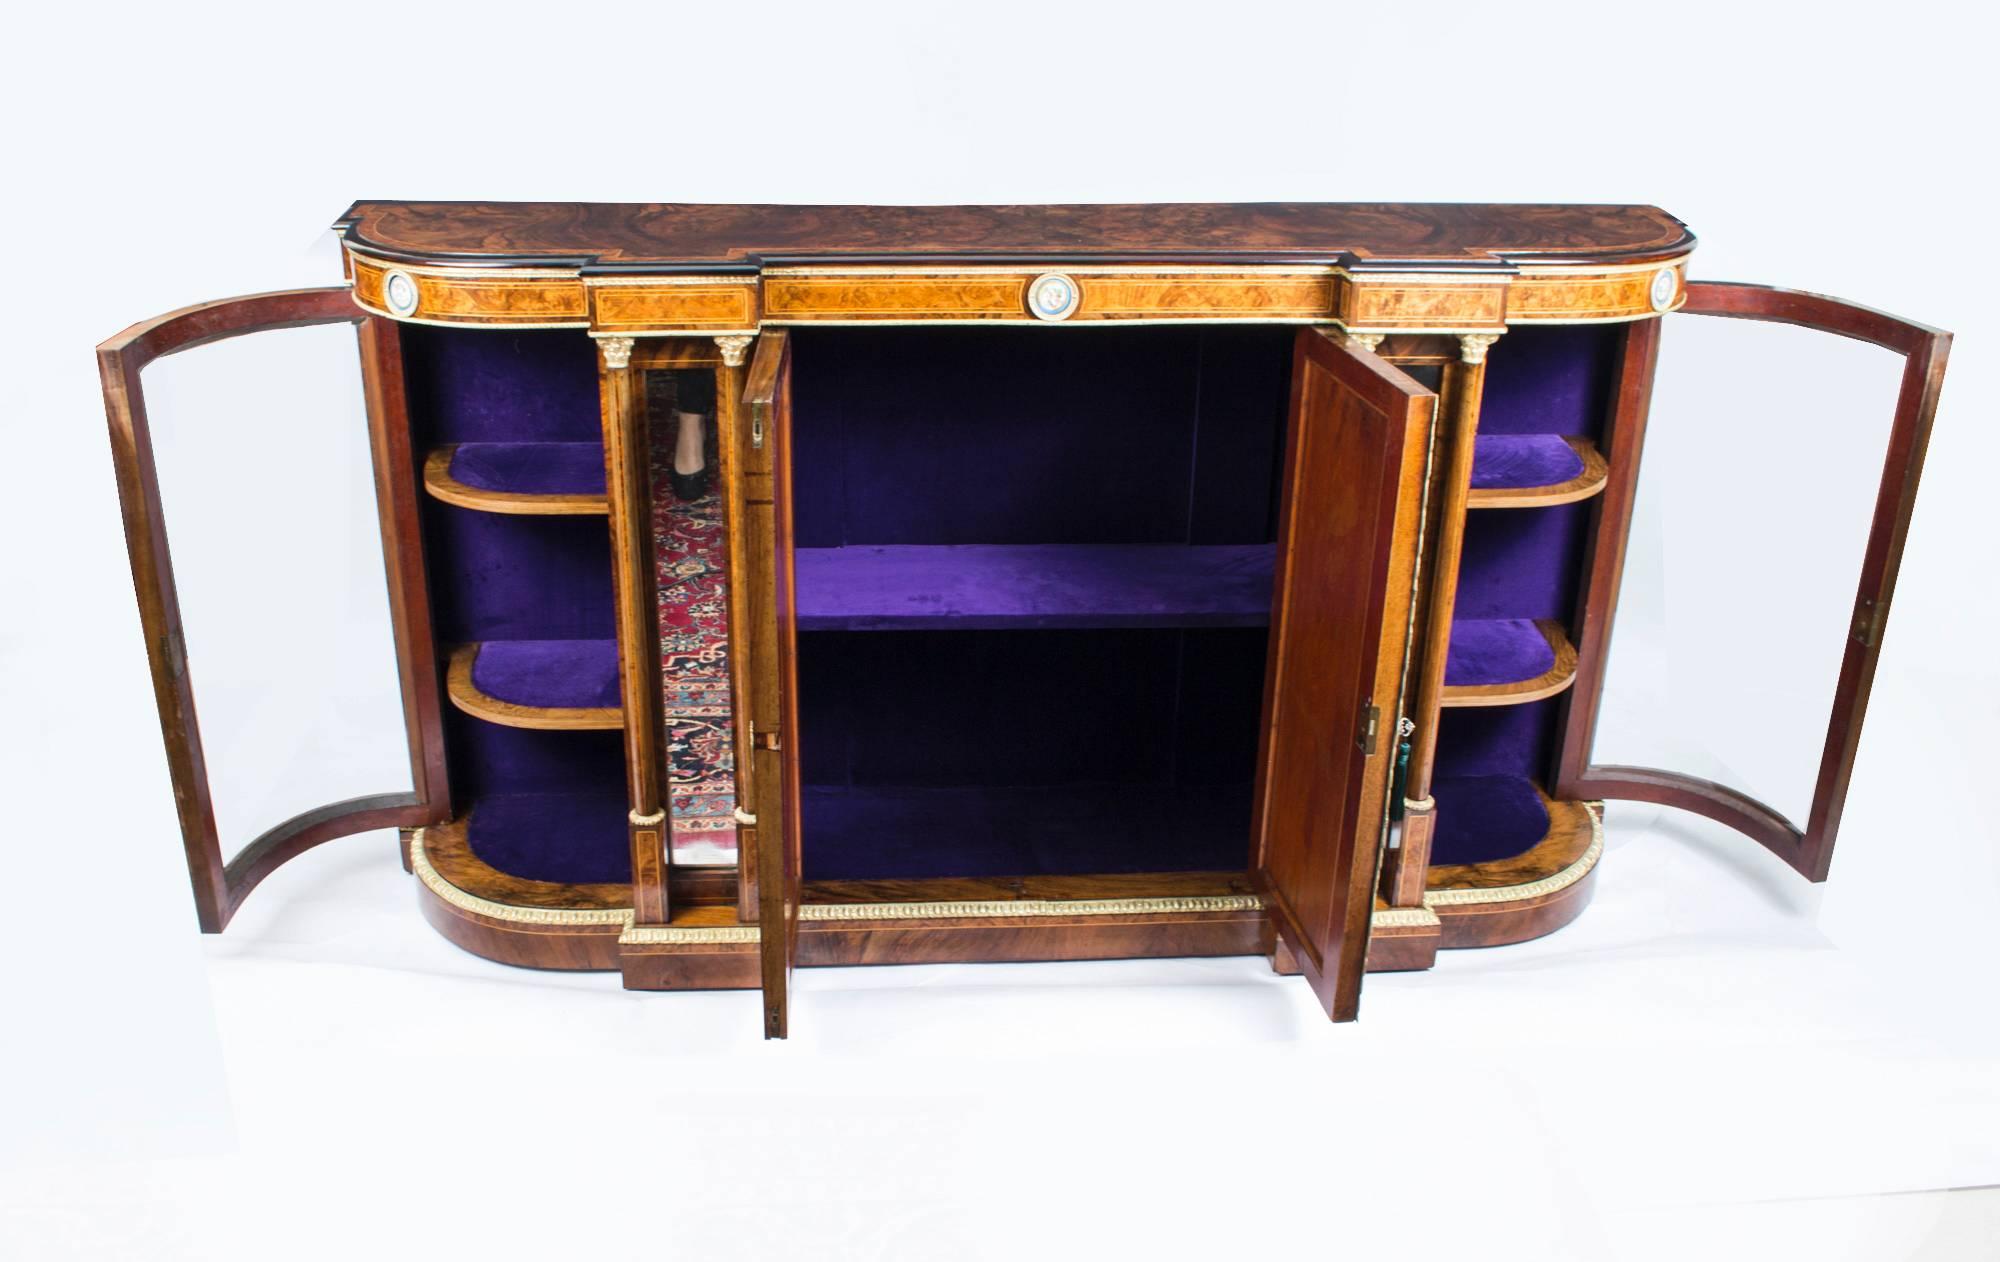 This is a superb antique Victorian burr walnut, ebonized, Sevres porcelain and ormolu-mounted credenza, circa 1860 in date.

It has a shaped bow front above a central pair of doors that are mounted with beautiful oval hand painted porcelain Sevres